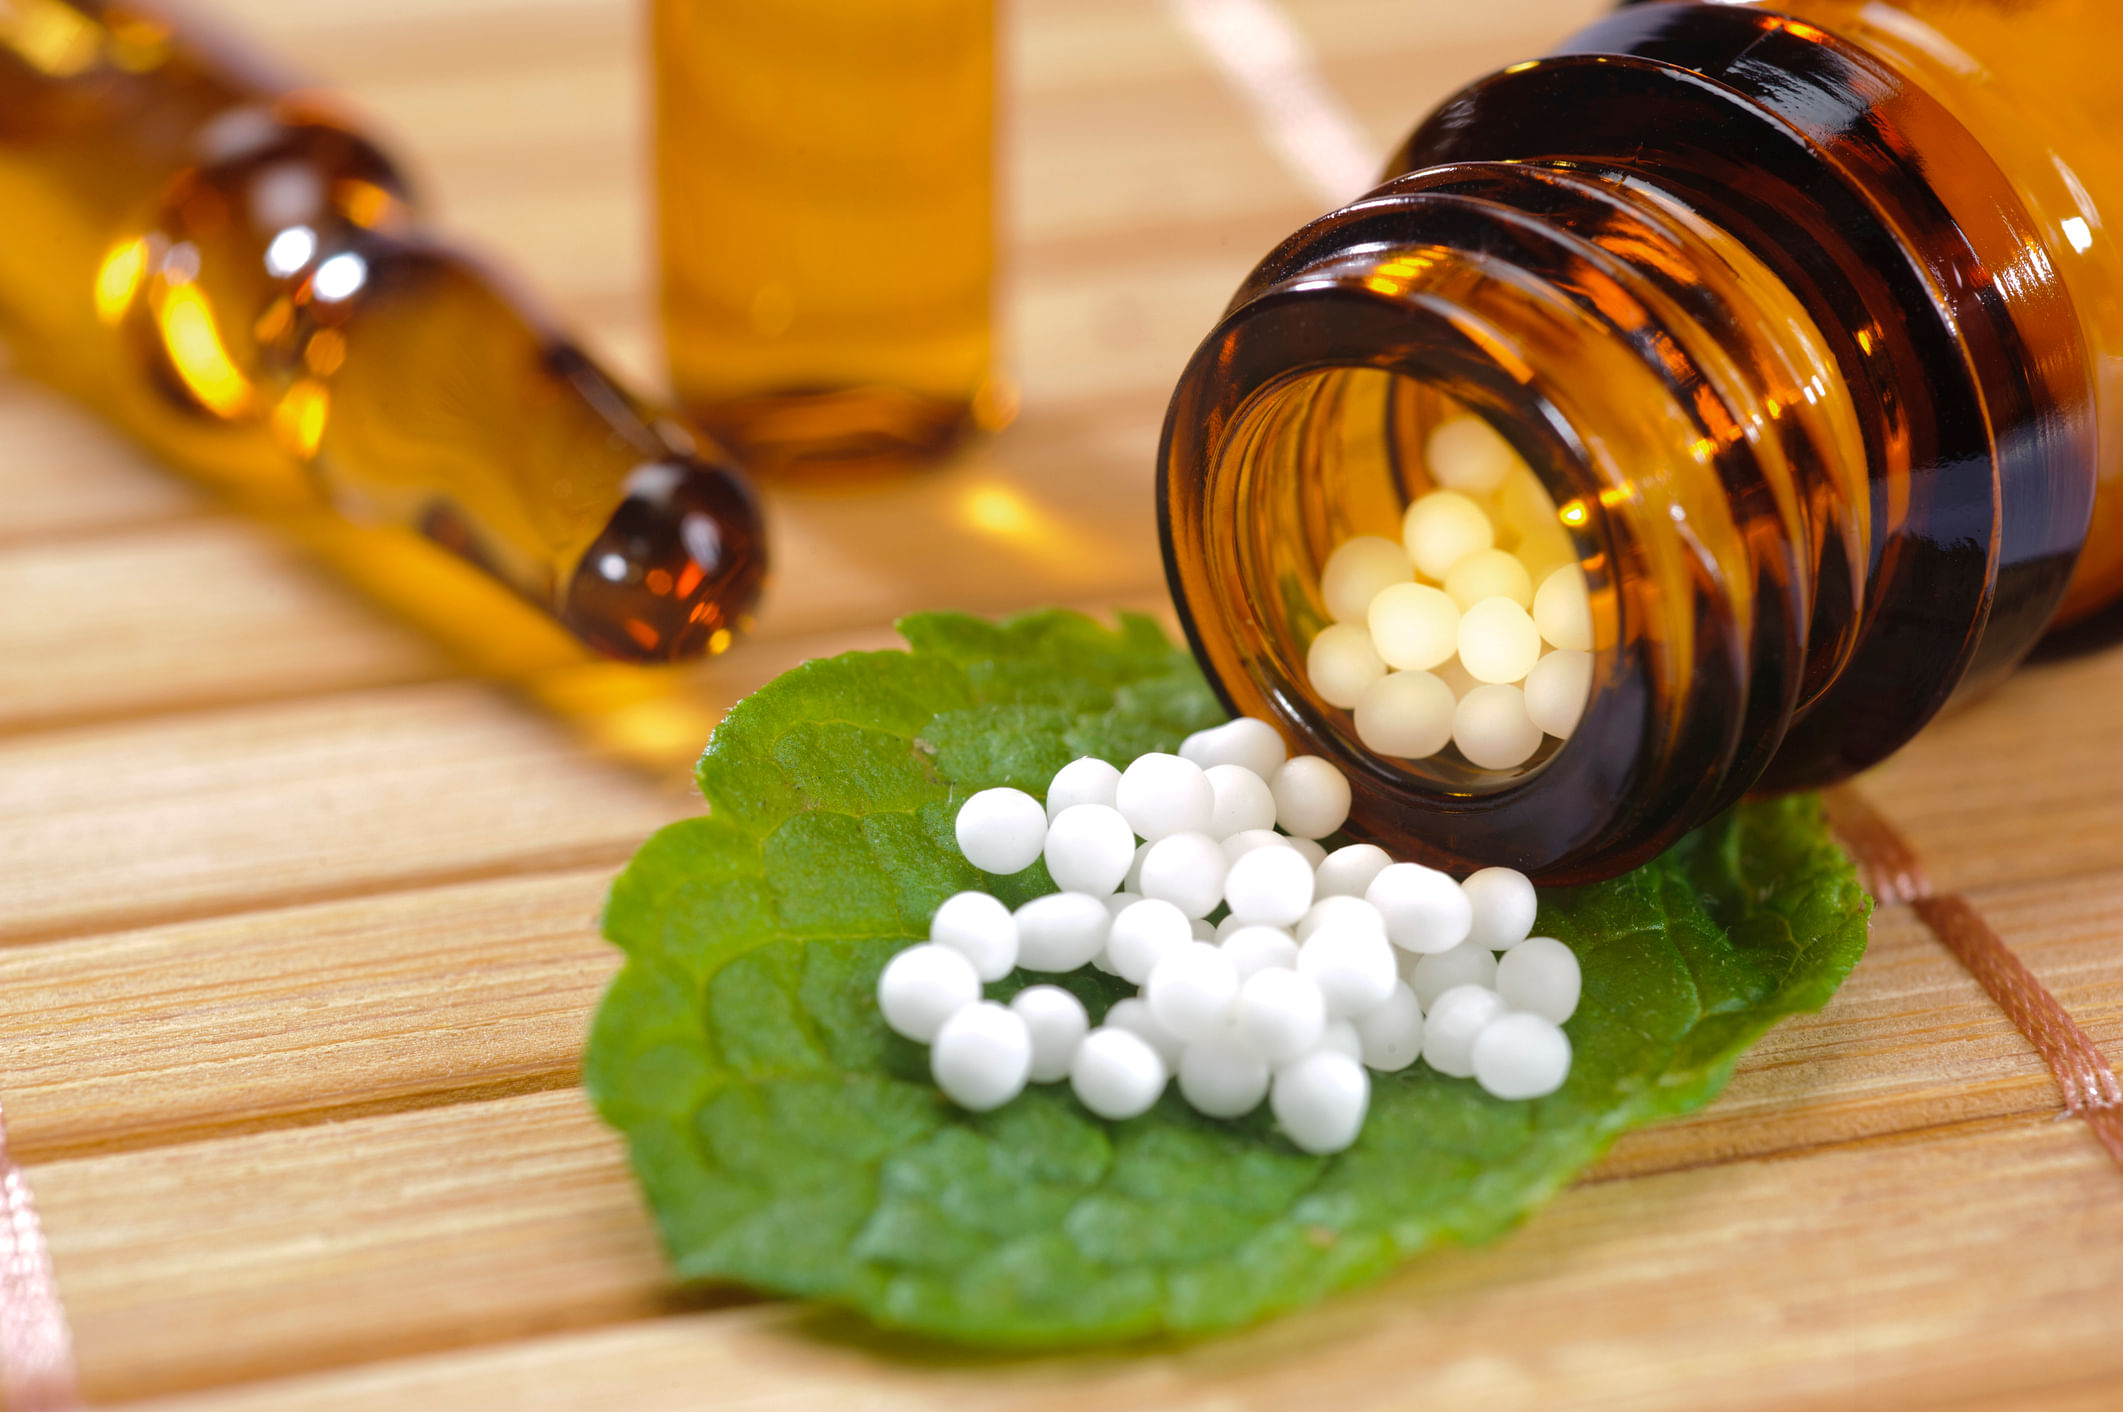 The Union Cabinet on Wednesday approved an ordinance which will replace the existing Central Council of Homoeopathy with a board of governor.